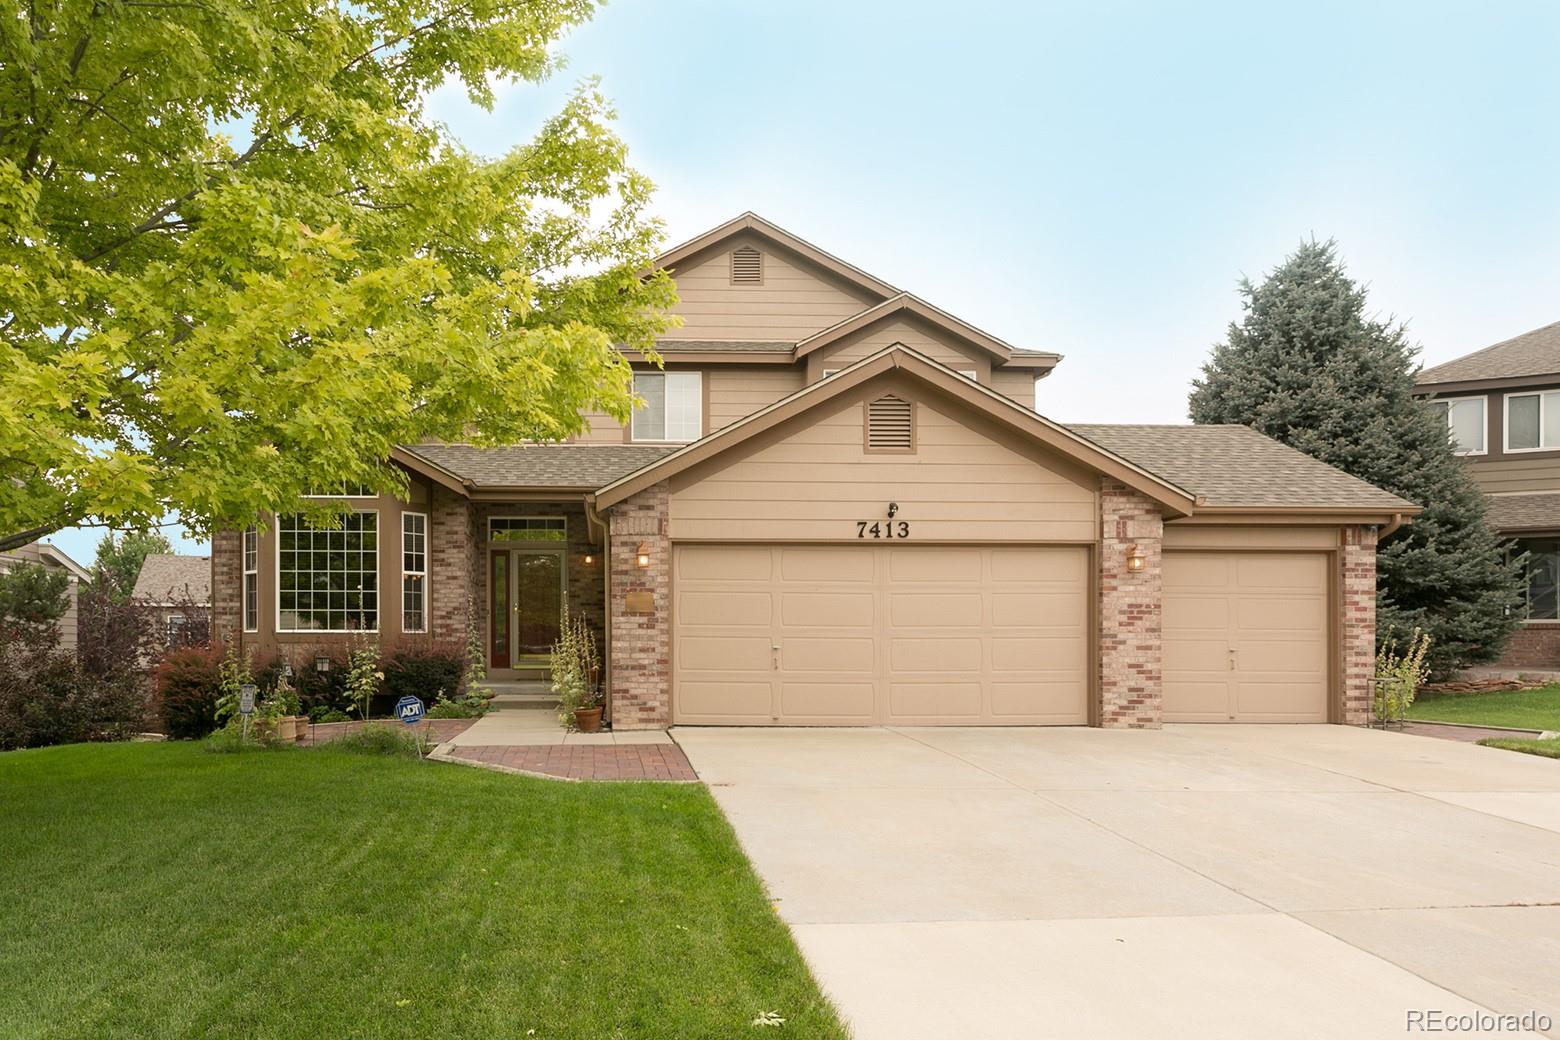 Inviting home on quiet cul-de-sac. Main floor master & laundry. Finished walkout level. Total of 5 bedrooms and 4 bathrooms.